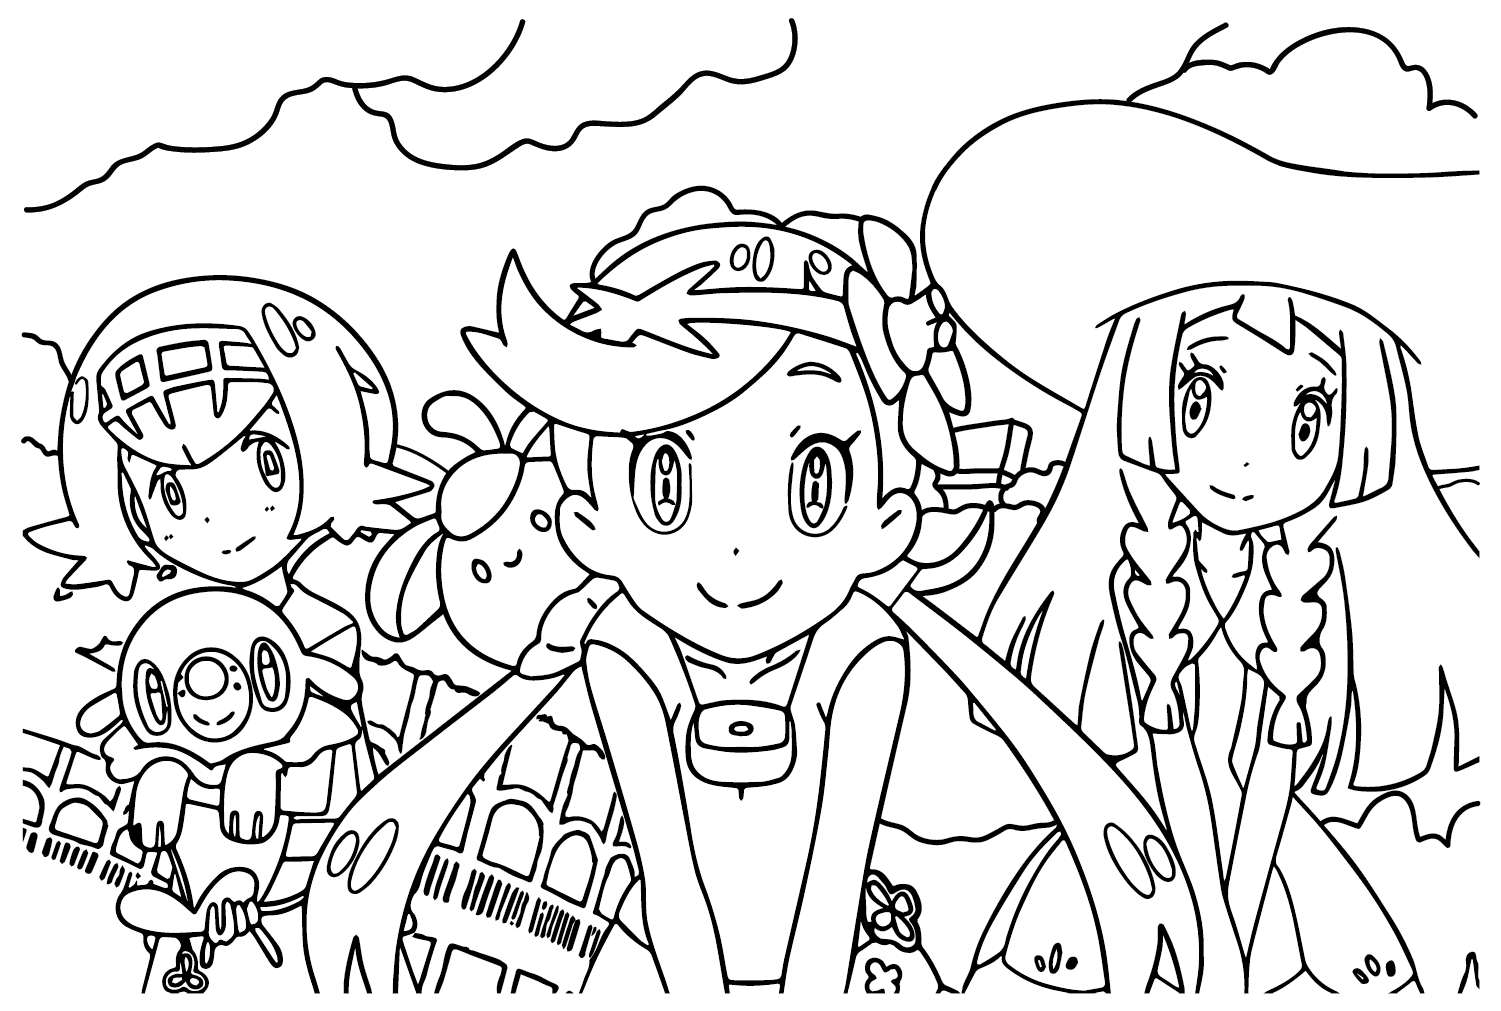 Mallow, Lillie and Lana Pokemon Coloring Page from Lana Pokemon